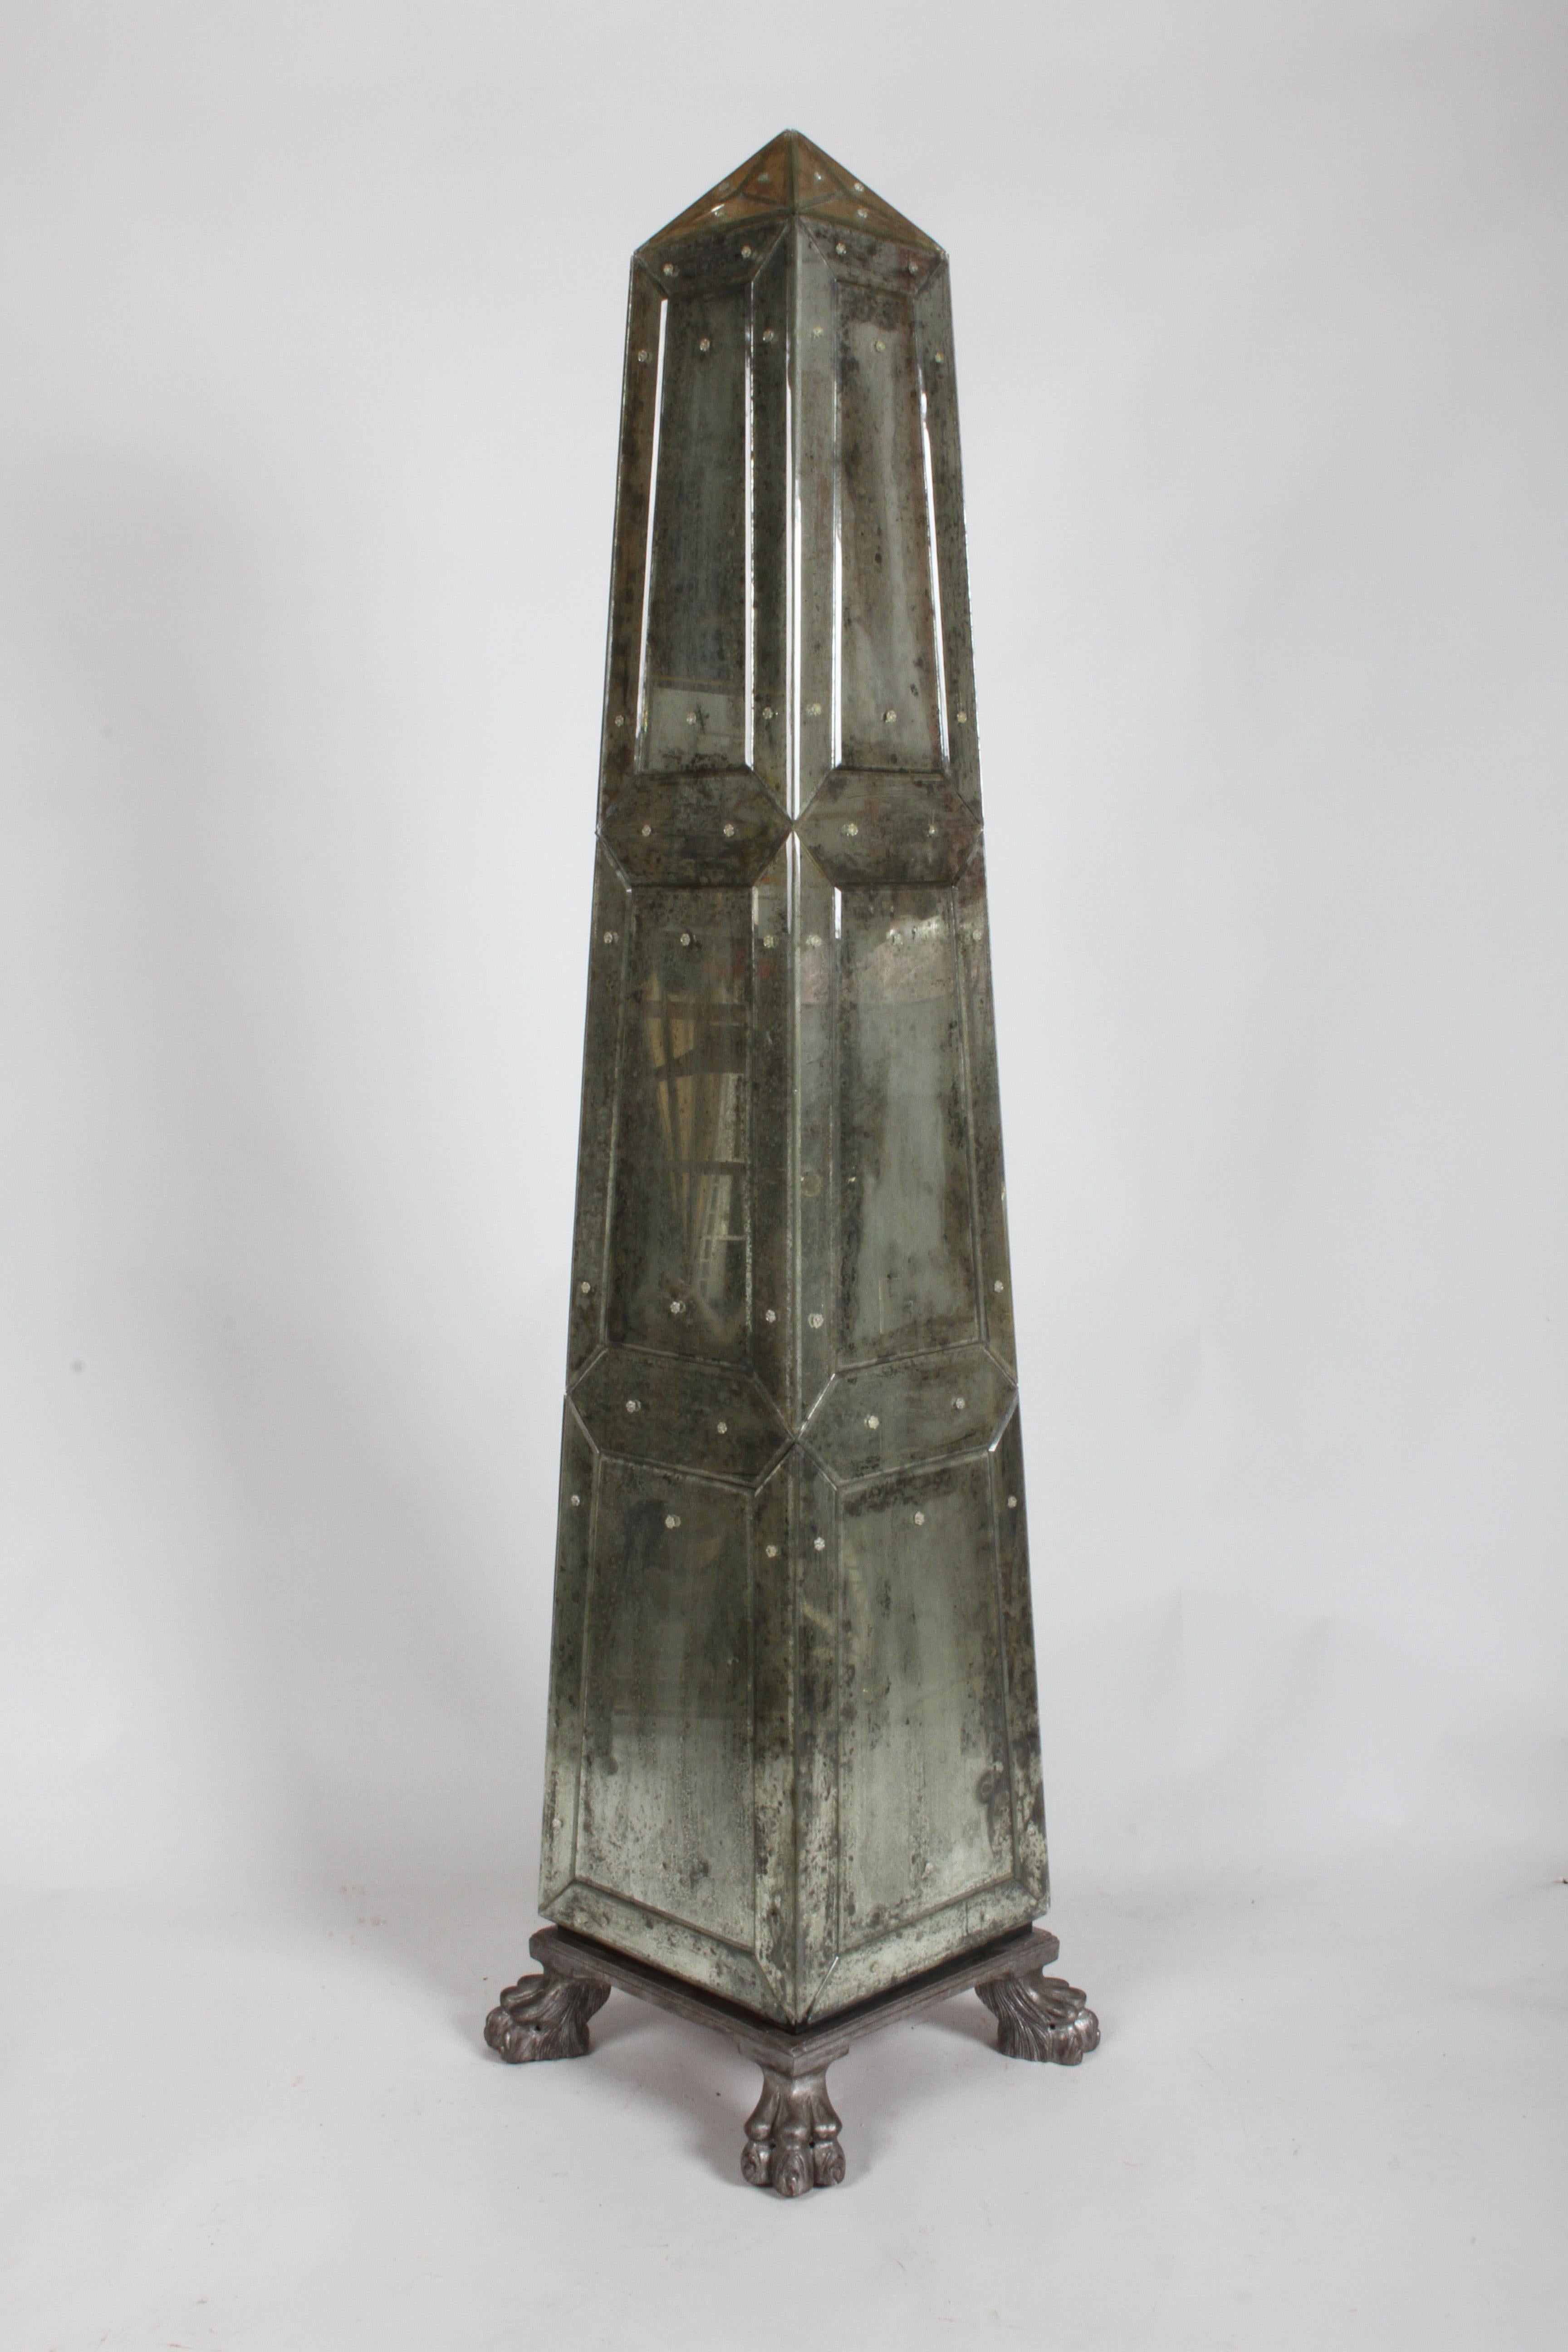 Large pair of decorative obelisks in the neoclassical style, possibly Italian. Each fully covered in antiqued or distressed beveled mirrored panels, attached with rosettes. The silver leafed bases have large hairy paw feet and are attached by screws